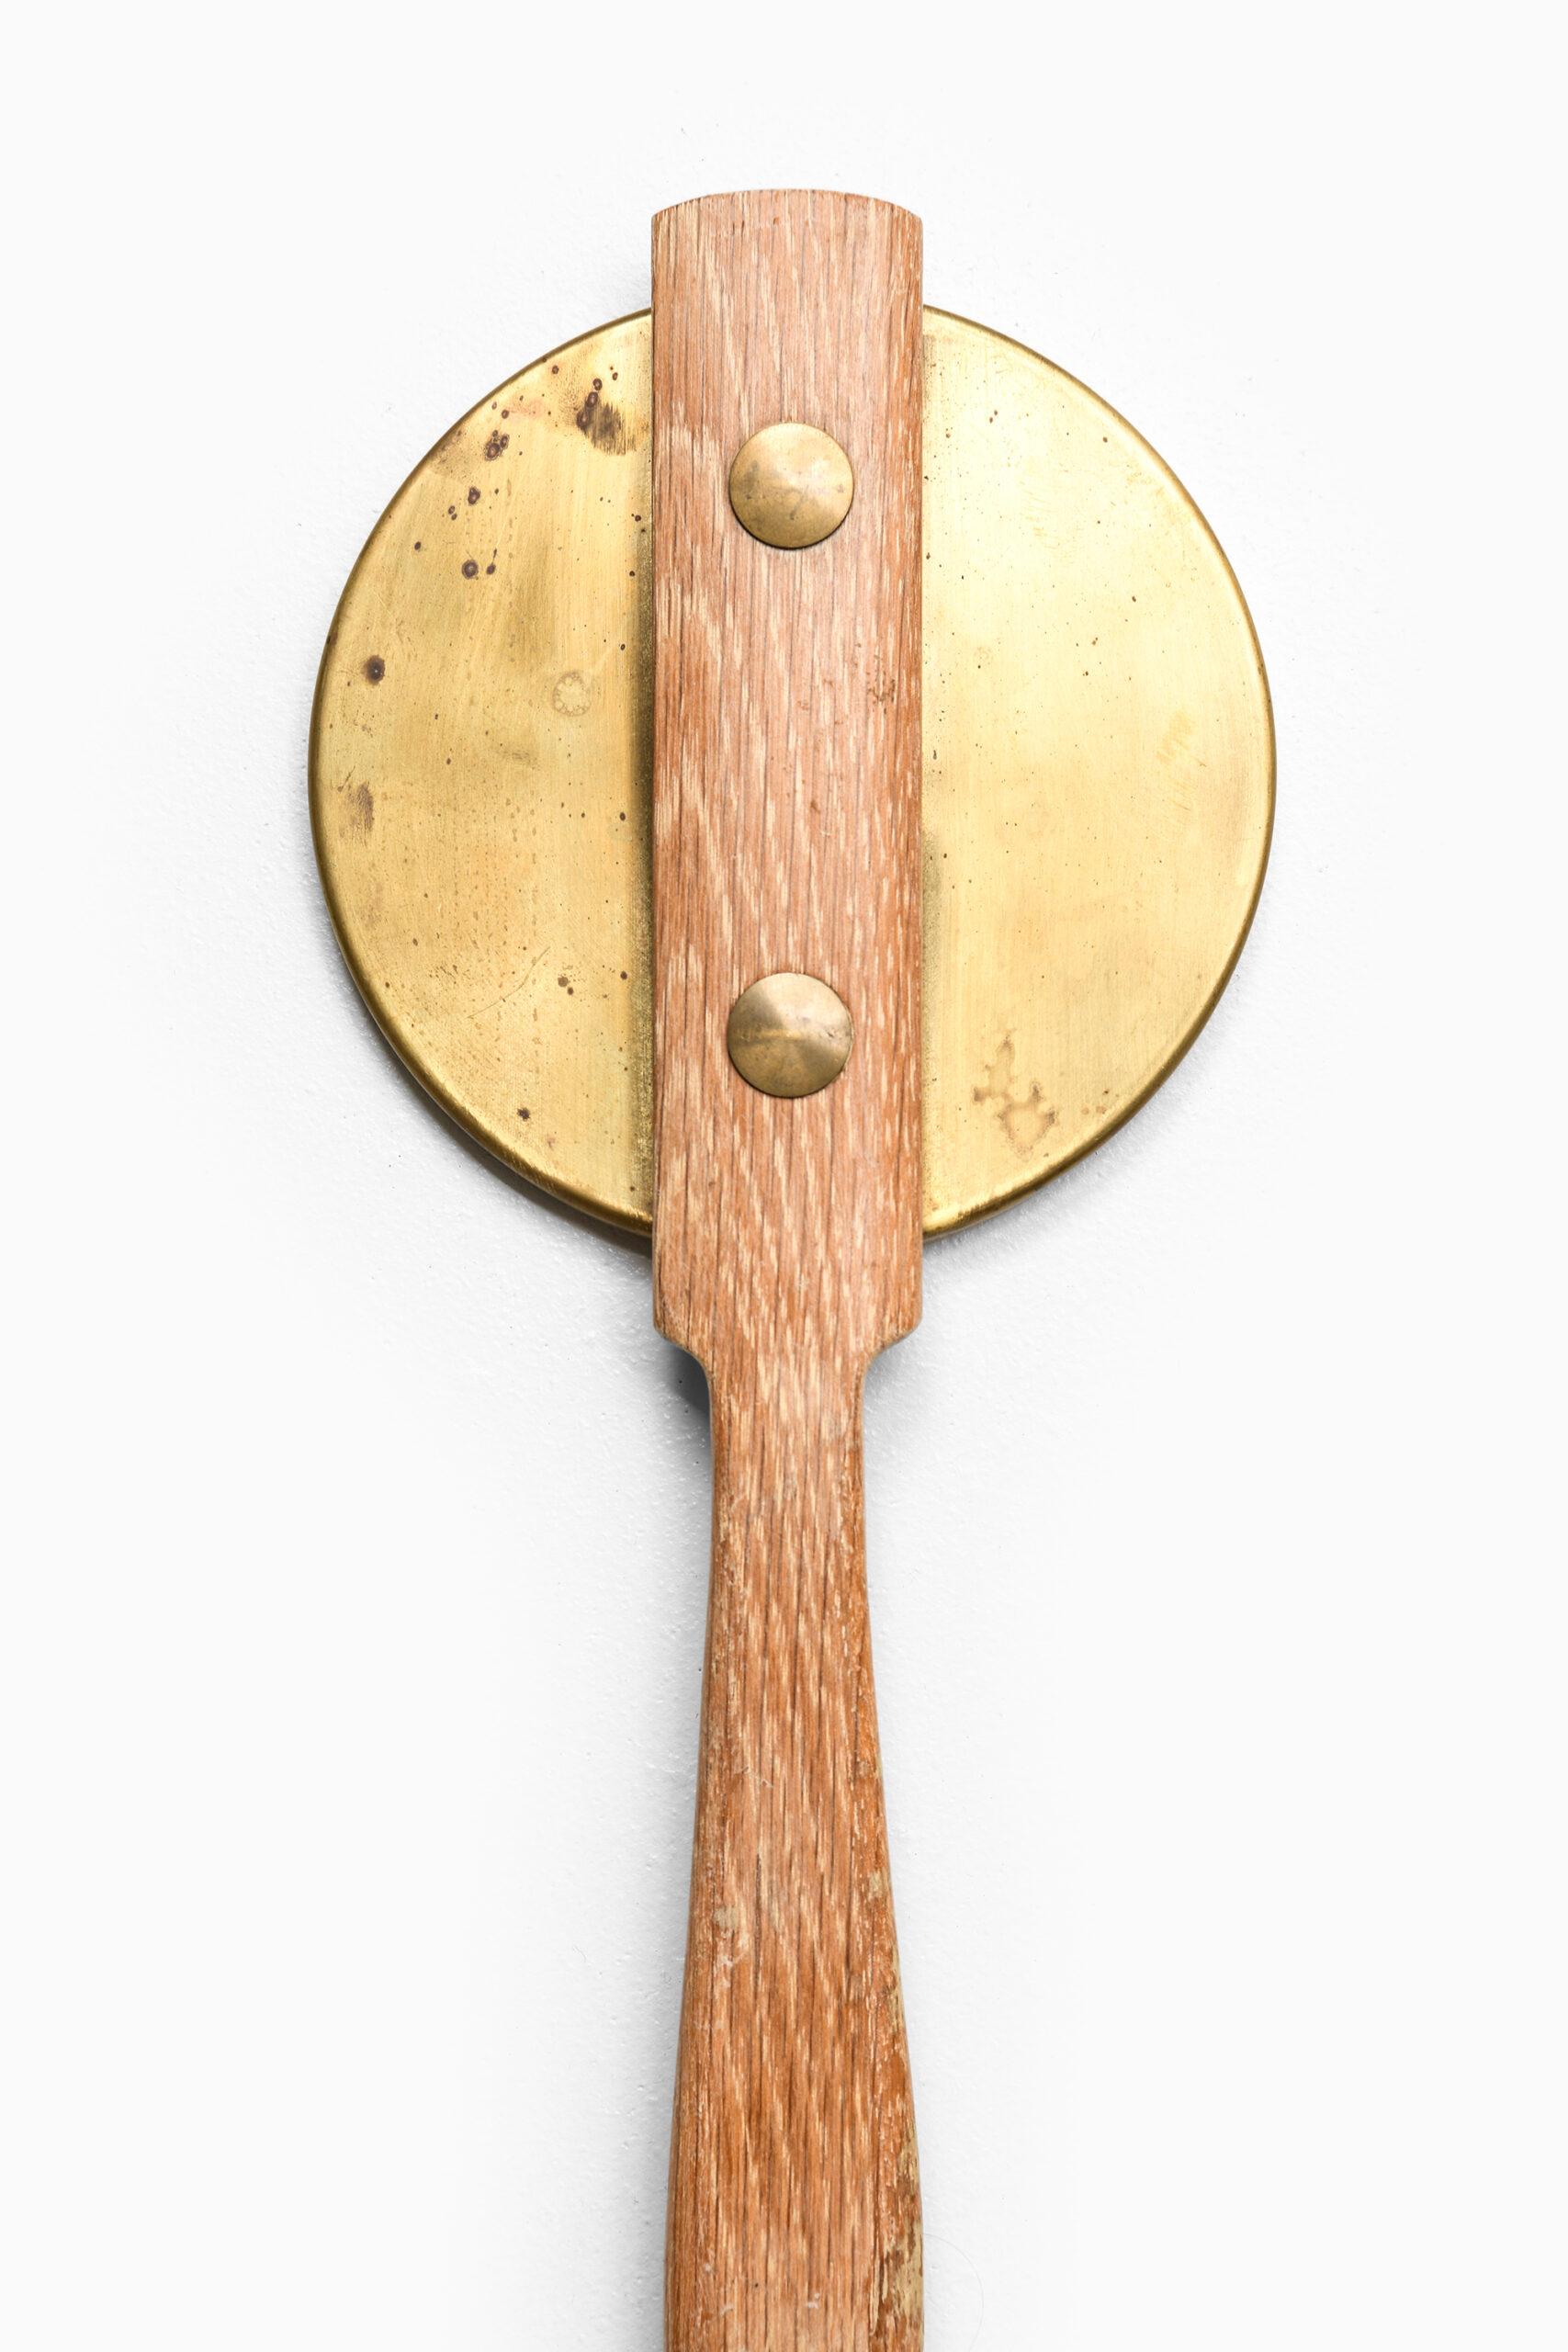 Hand mirror by unknown designer. Probably produced in Sweden.